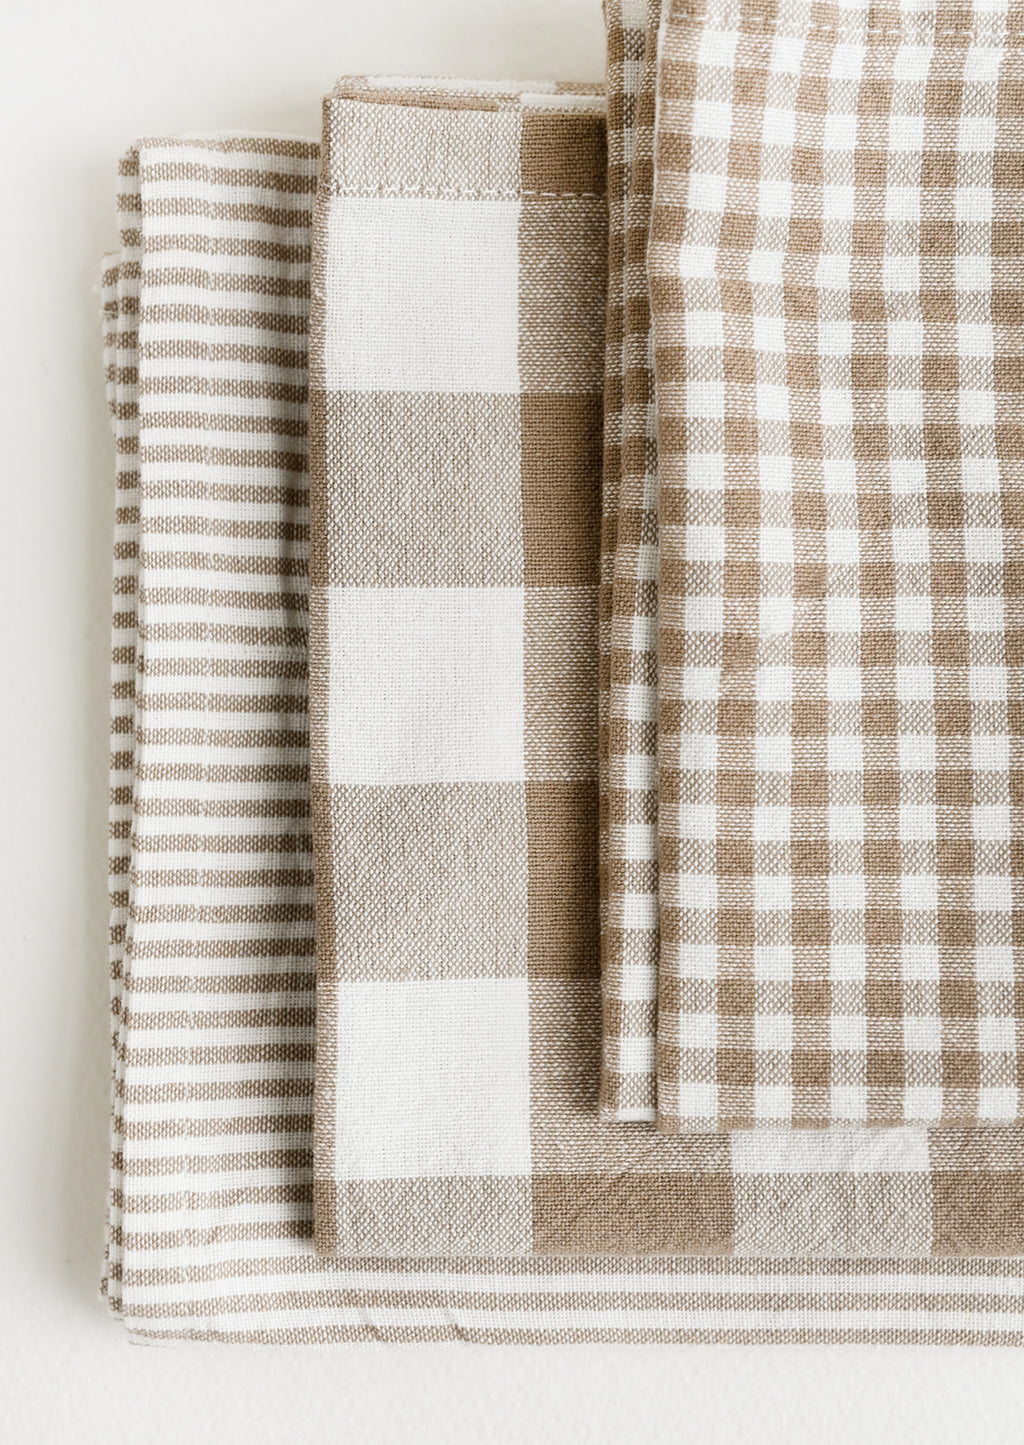 2: Three folded tea towels in tan and white check and stripe patterns.